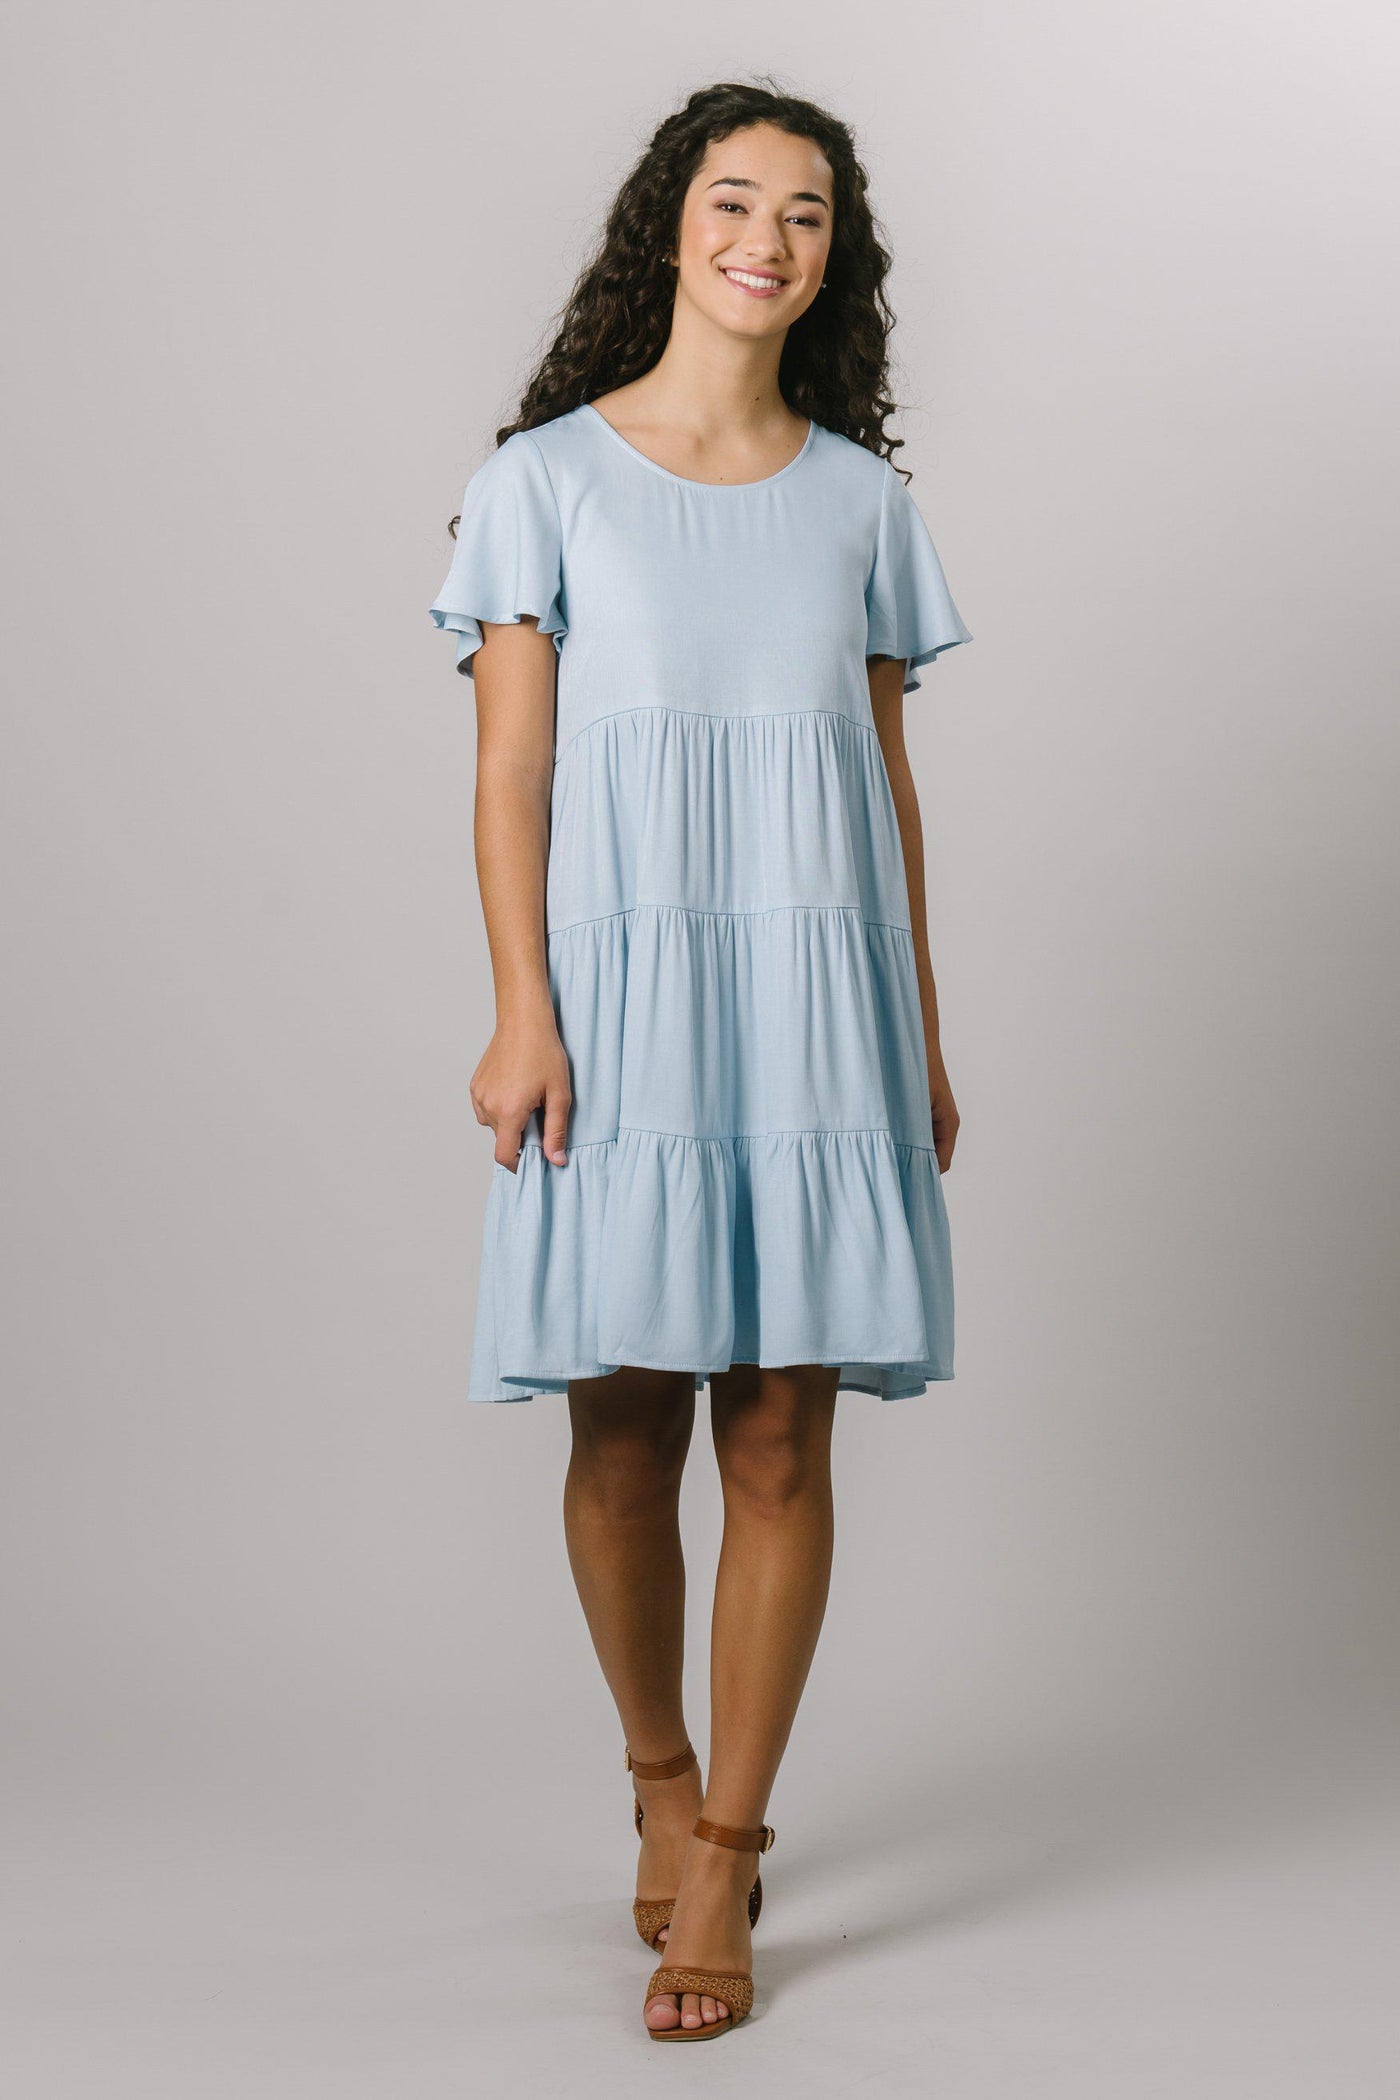 A modest, loose fitting everyday dress that features a scoop neck and flutter sleeves in baby blue.